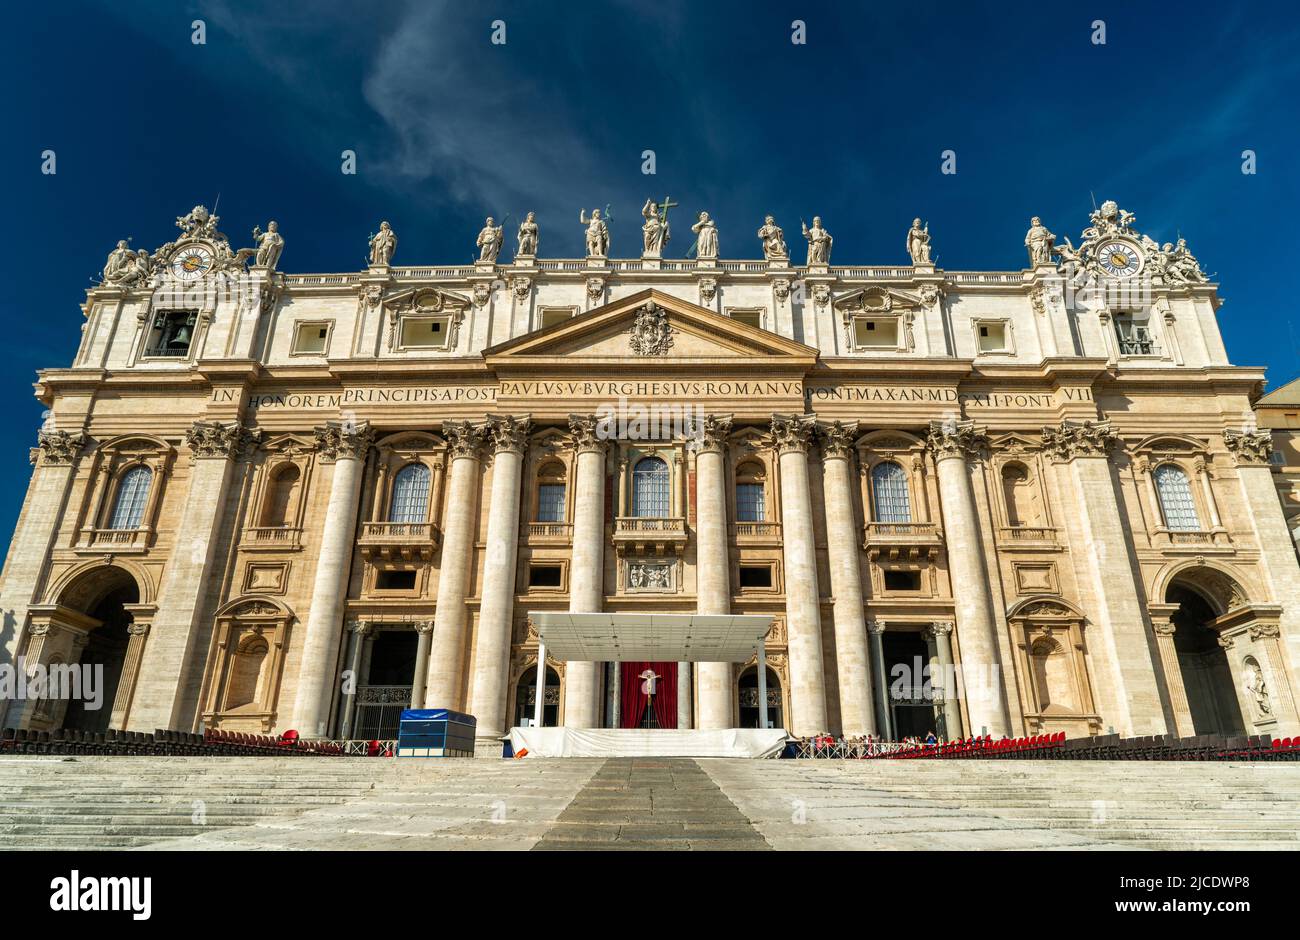 St Peter's Basilica in Vatican, Rome, Italy. San Pietro Cathedral is famous landmark of Rome. Front view of stairway to Catholic church. Concept of Va Stock Photo